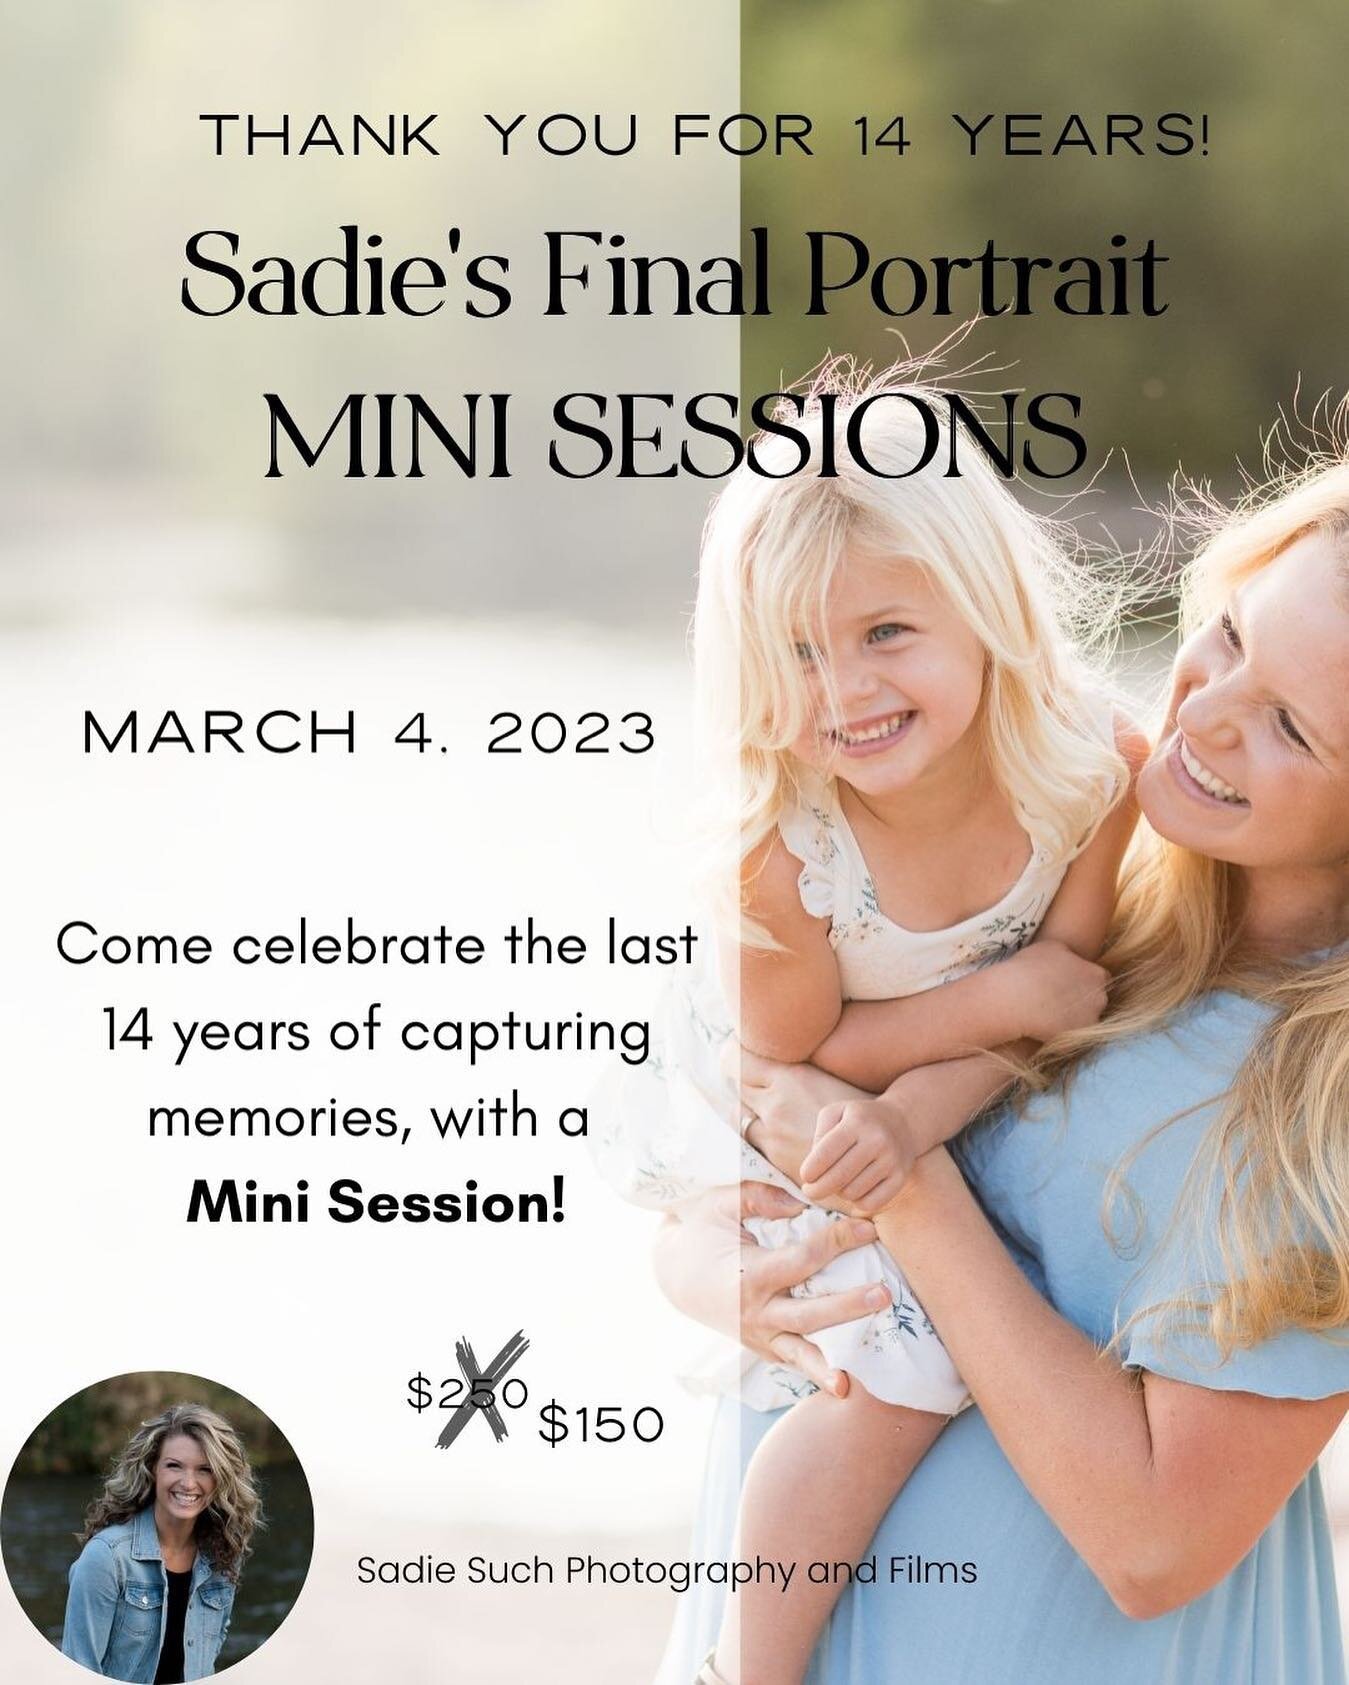 THANK YOU  for an amazing 14 years of running Sadie Such Photography and Films! 😮❤️ @sadiesuchfilms 

To celebrate, I am doing discounted rate for mini sessions on Saturday, March 4th!

✨ Normally $250 ... final celebration rate of $150! ✨

From cou